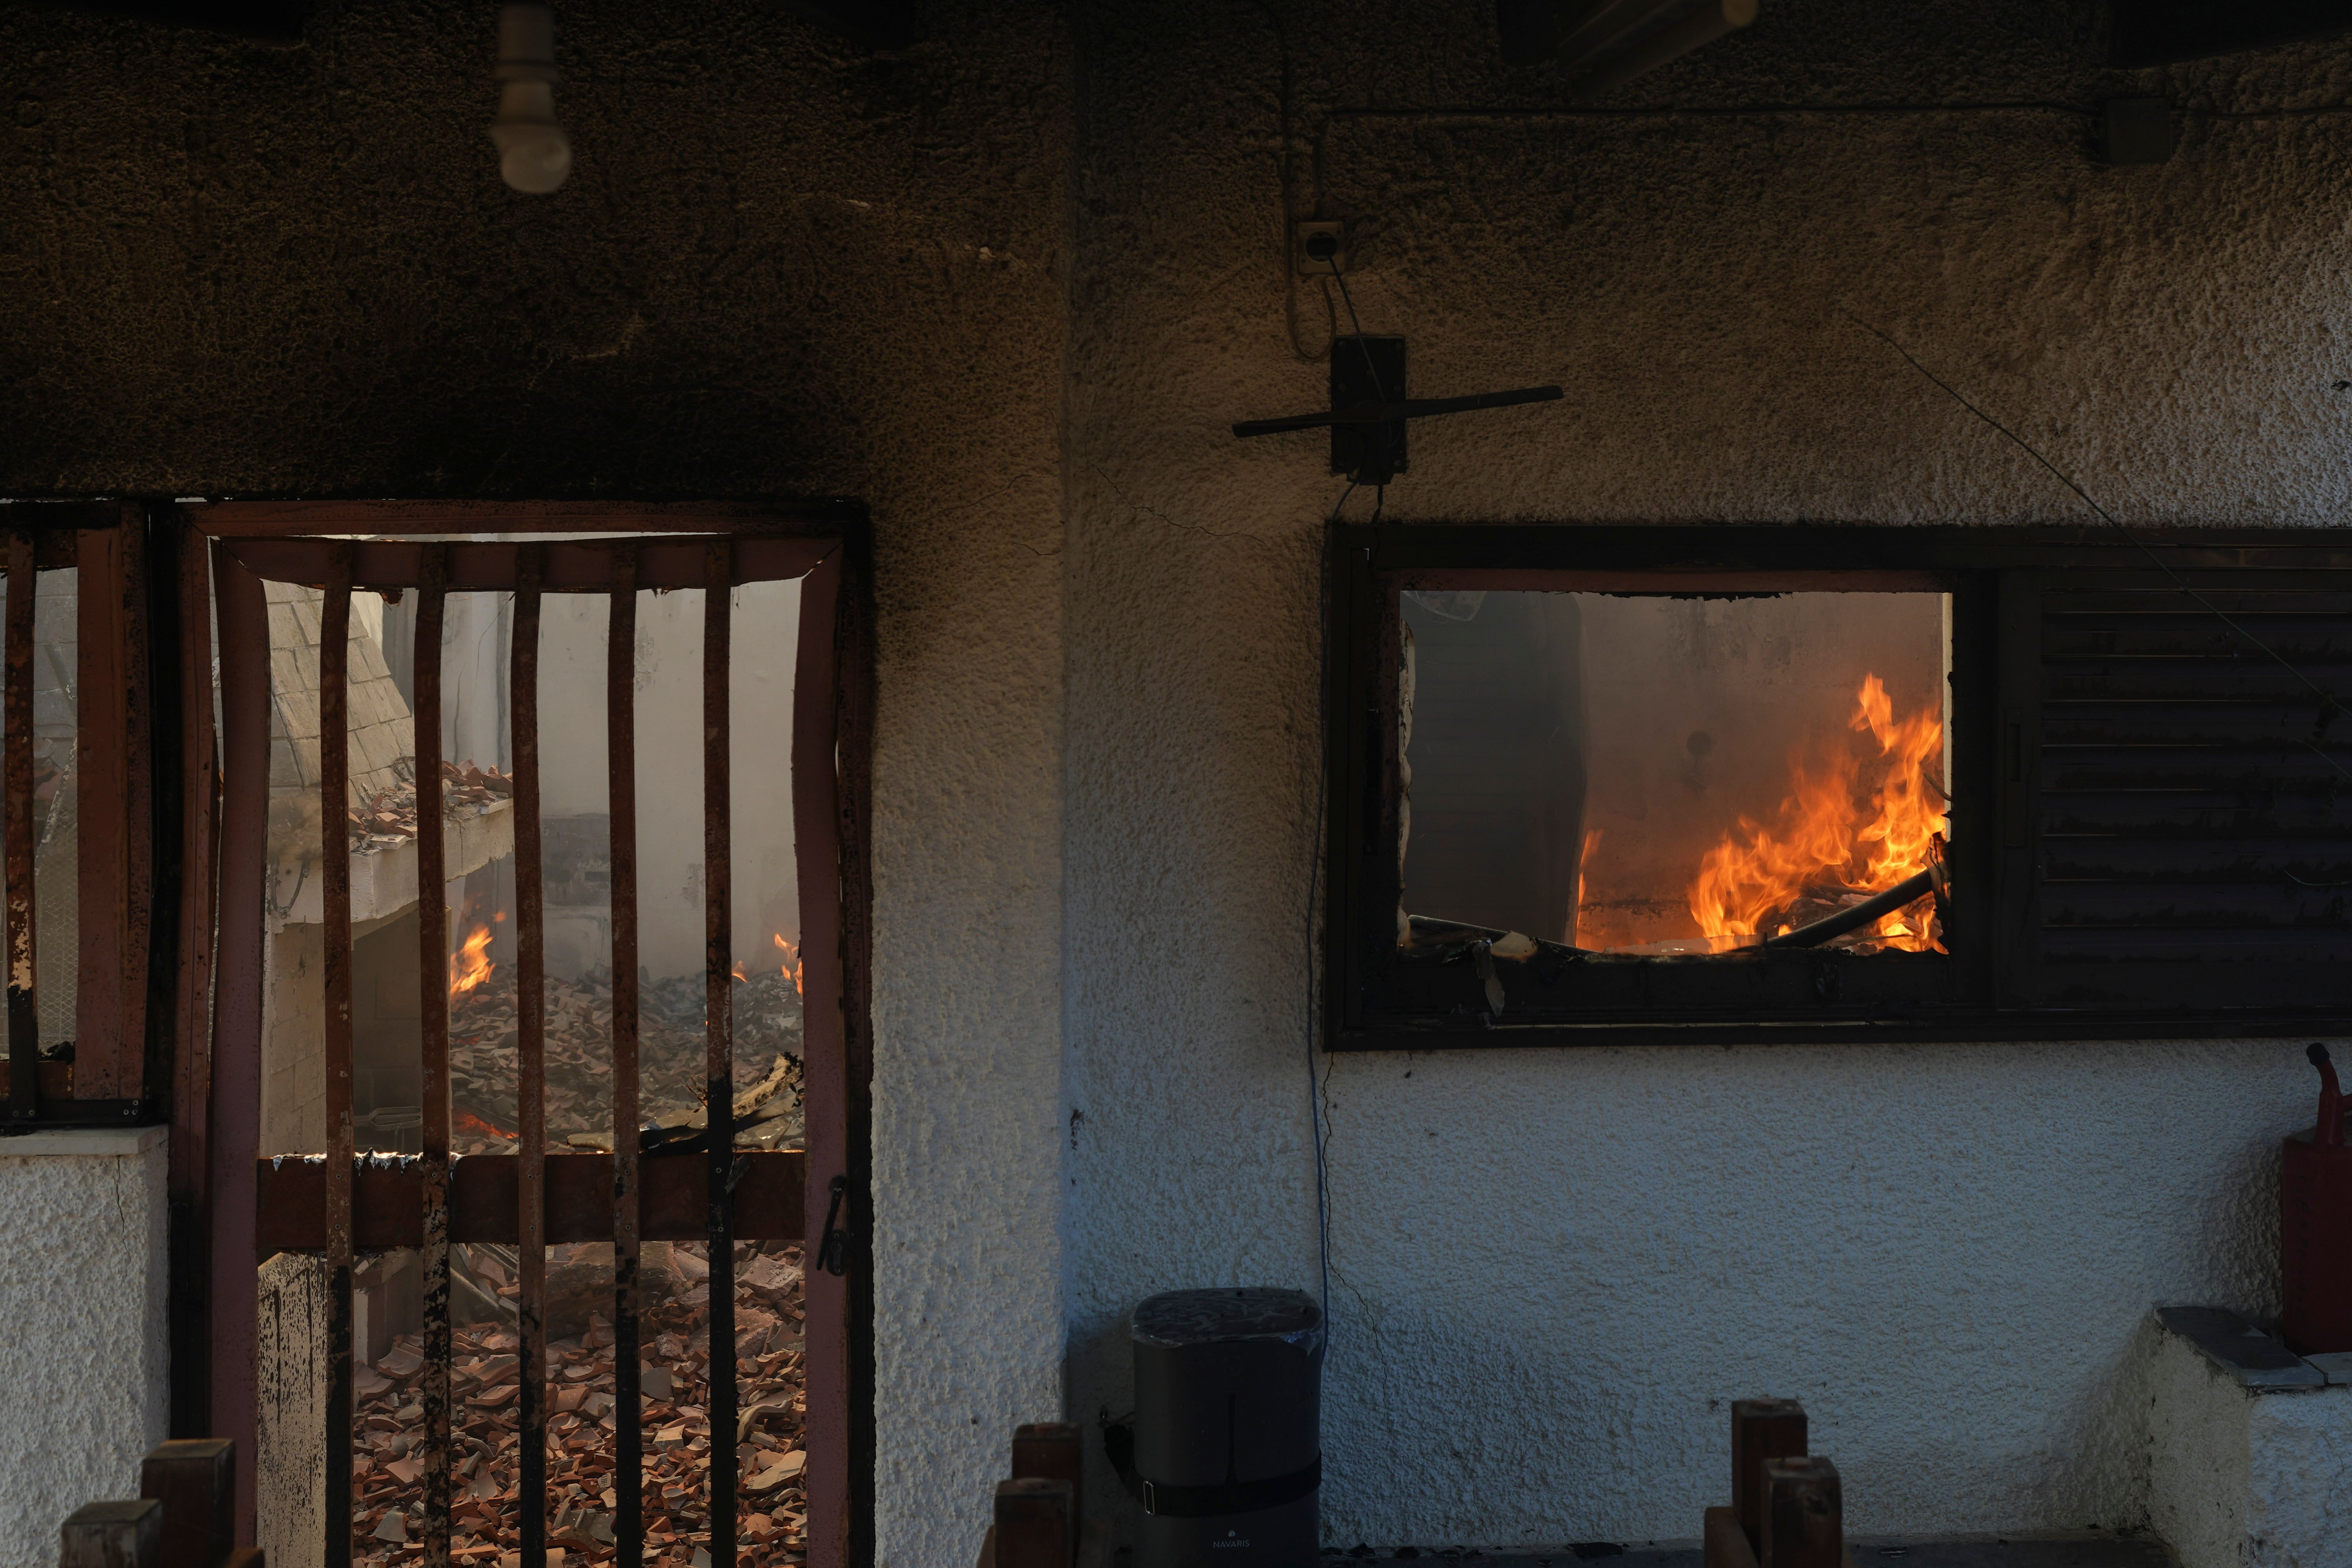 A house was left burning near the town of Loutraki